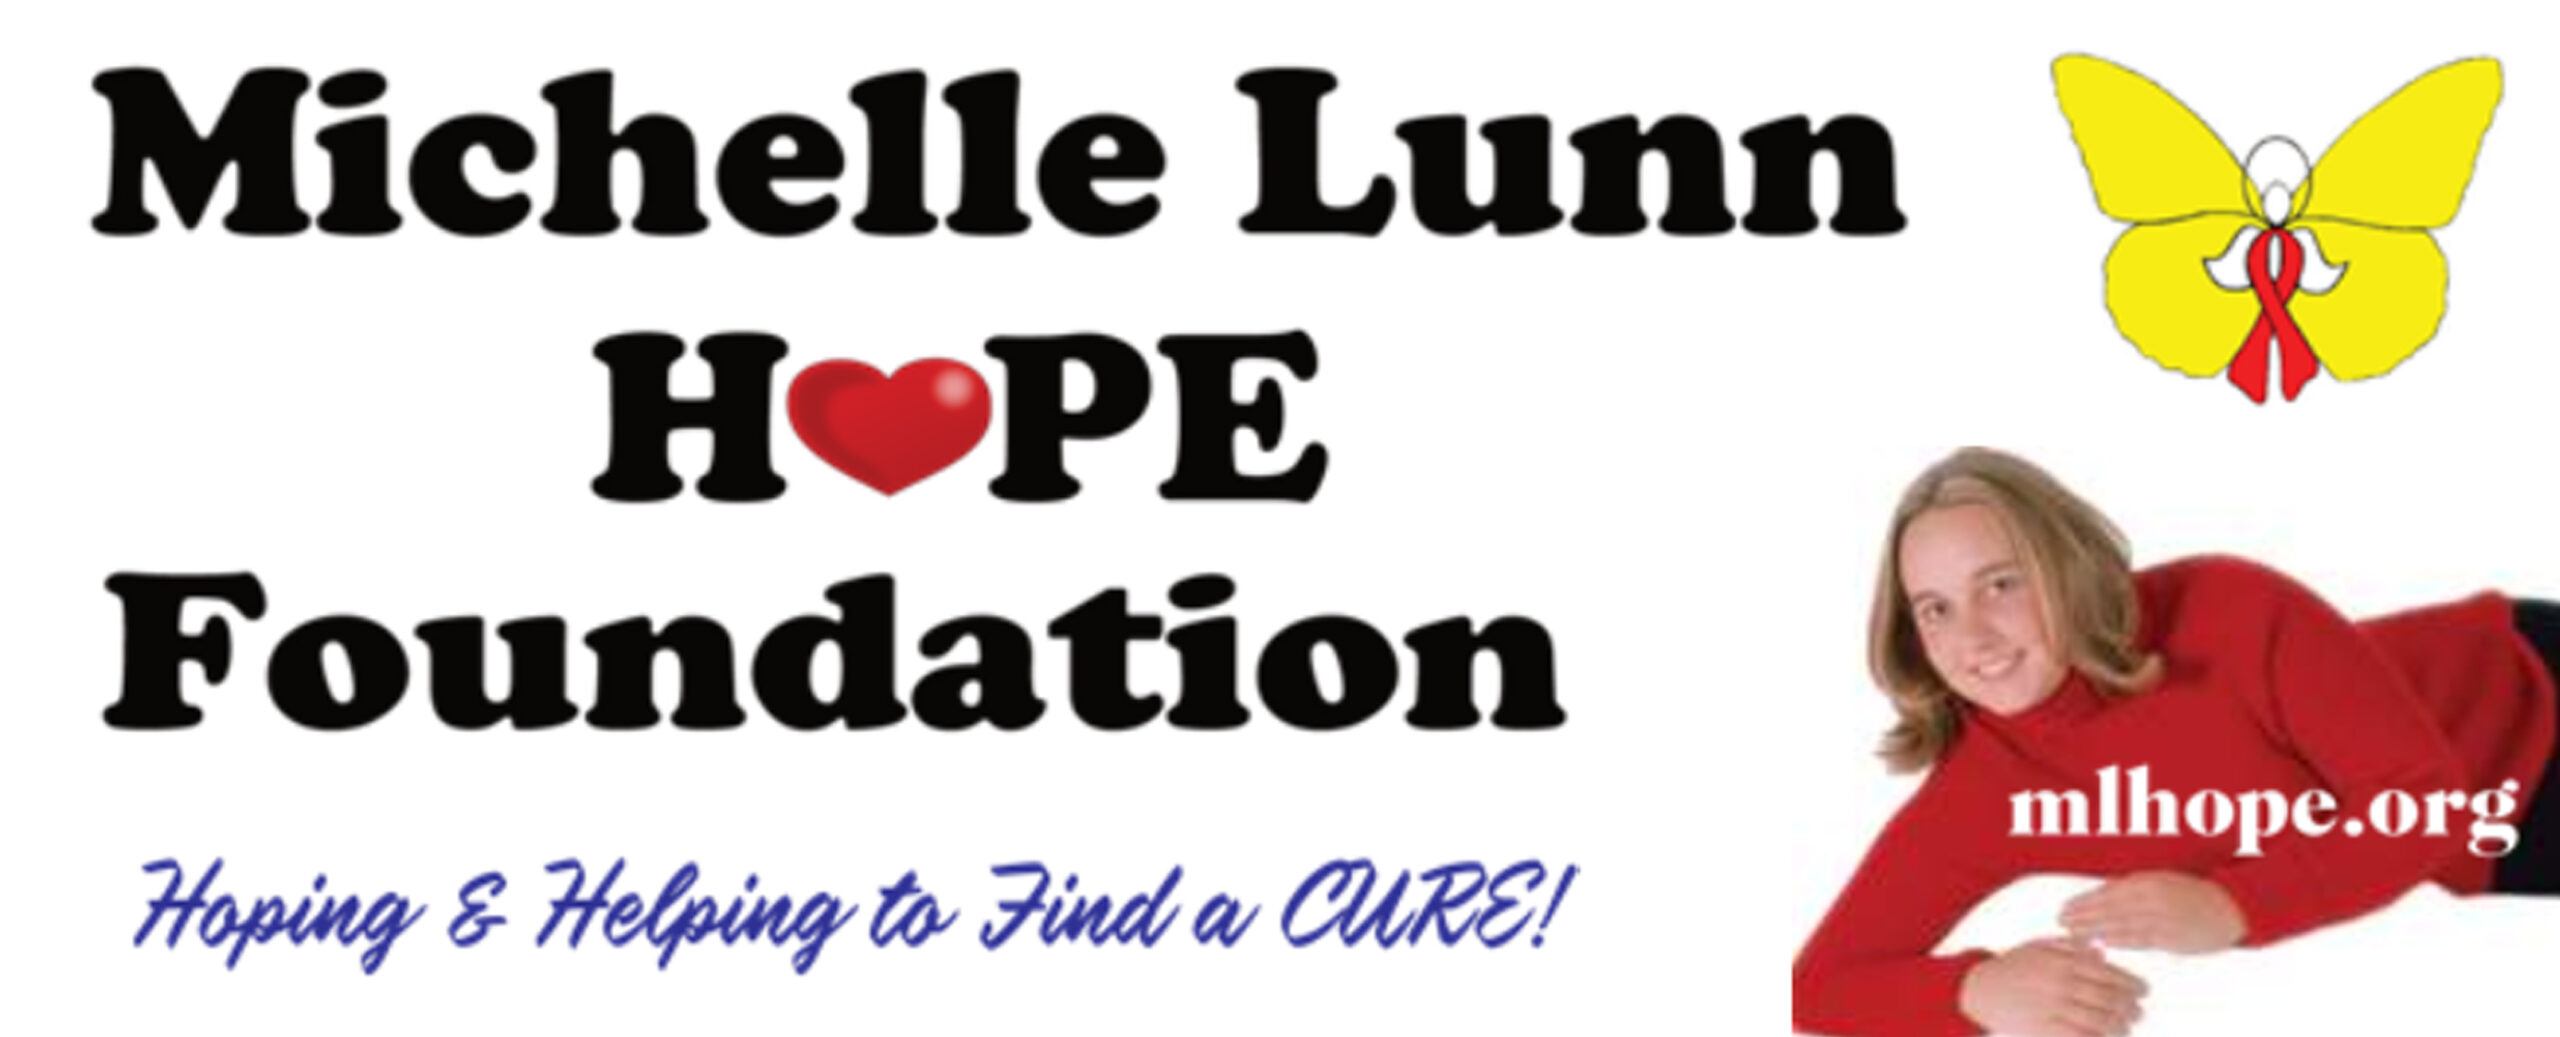 Michelle Marie Lunn Hope Foundation – Auctions